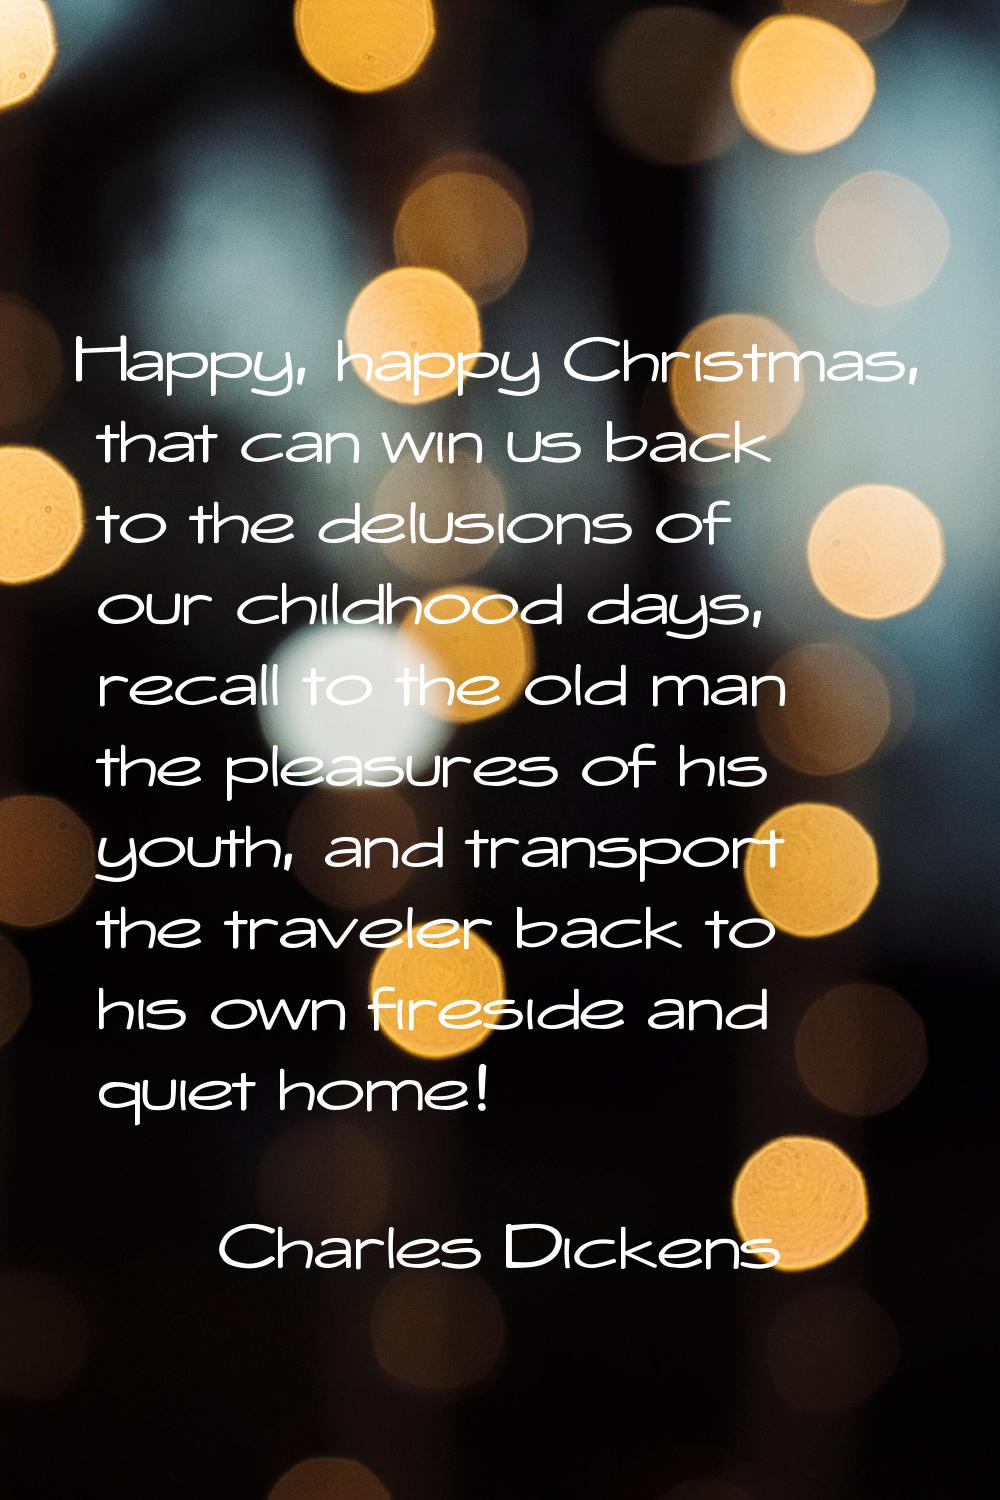 Happy, happy Christmas, that can win us back to the delusions of our childhood days, recall to the 